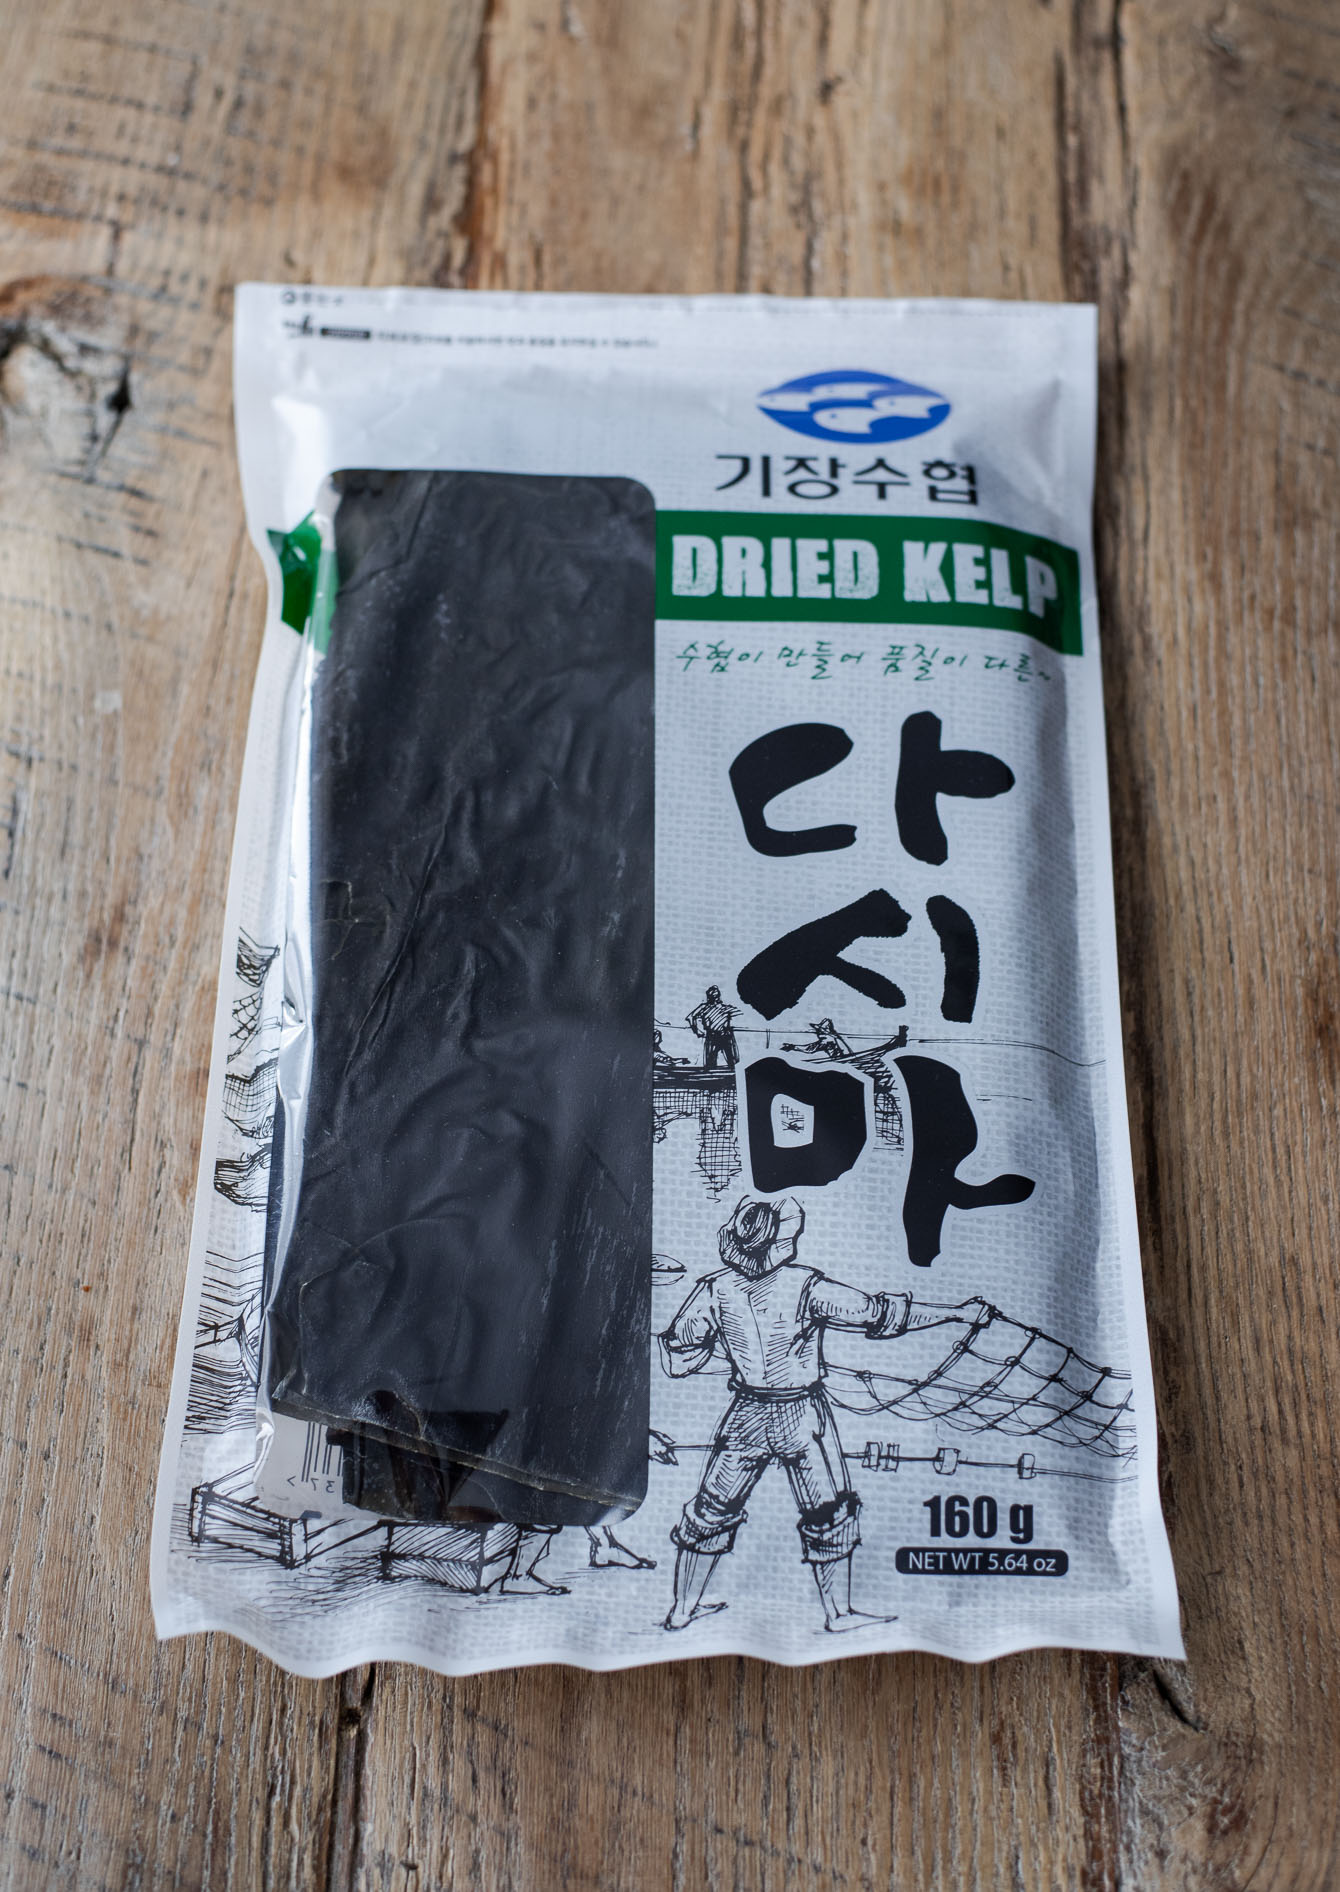 Dashima (Korean dried sea kelp) comes in large sheets in a package.